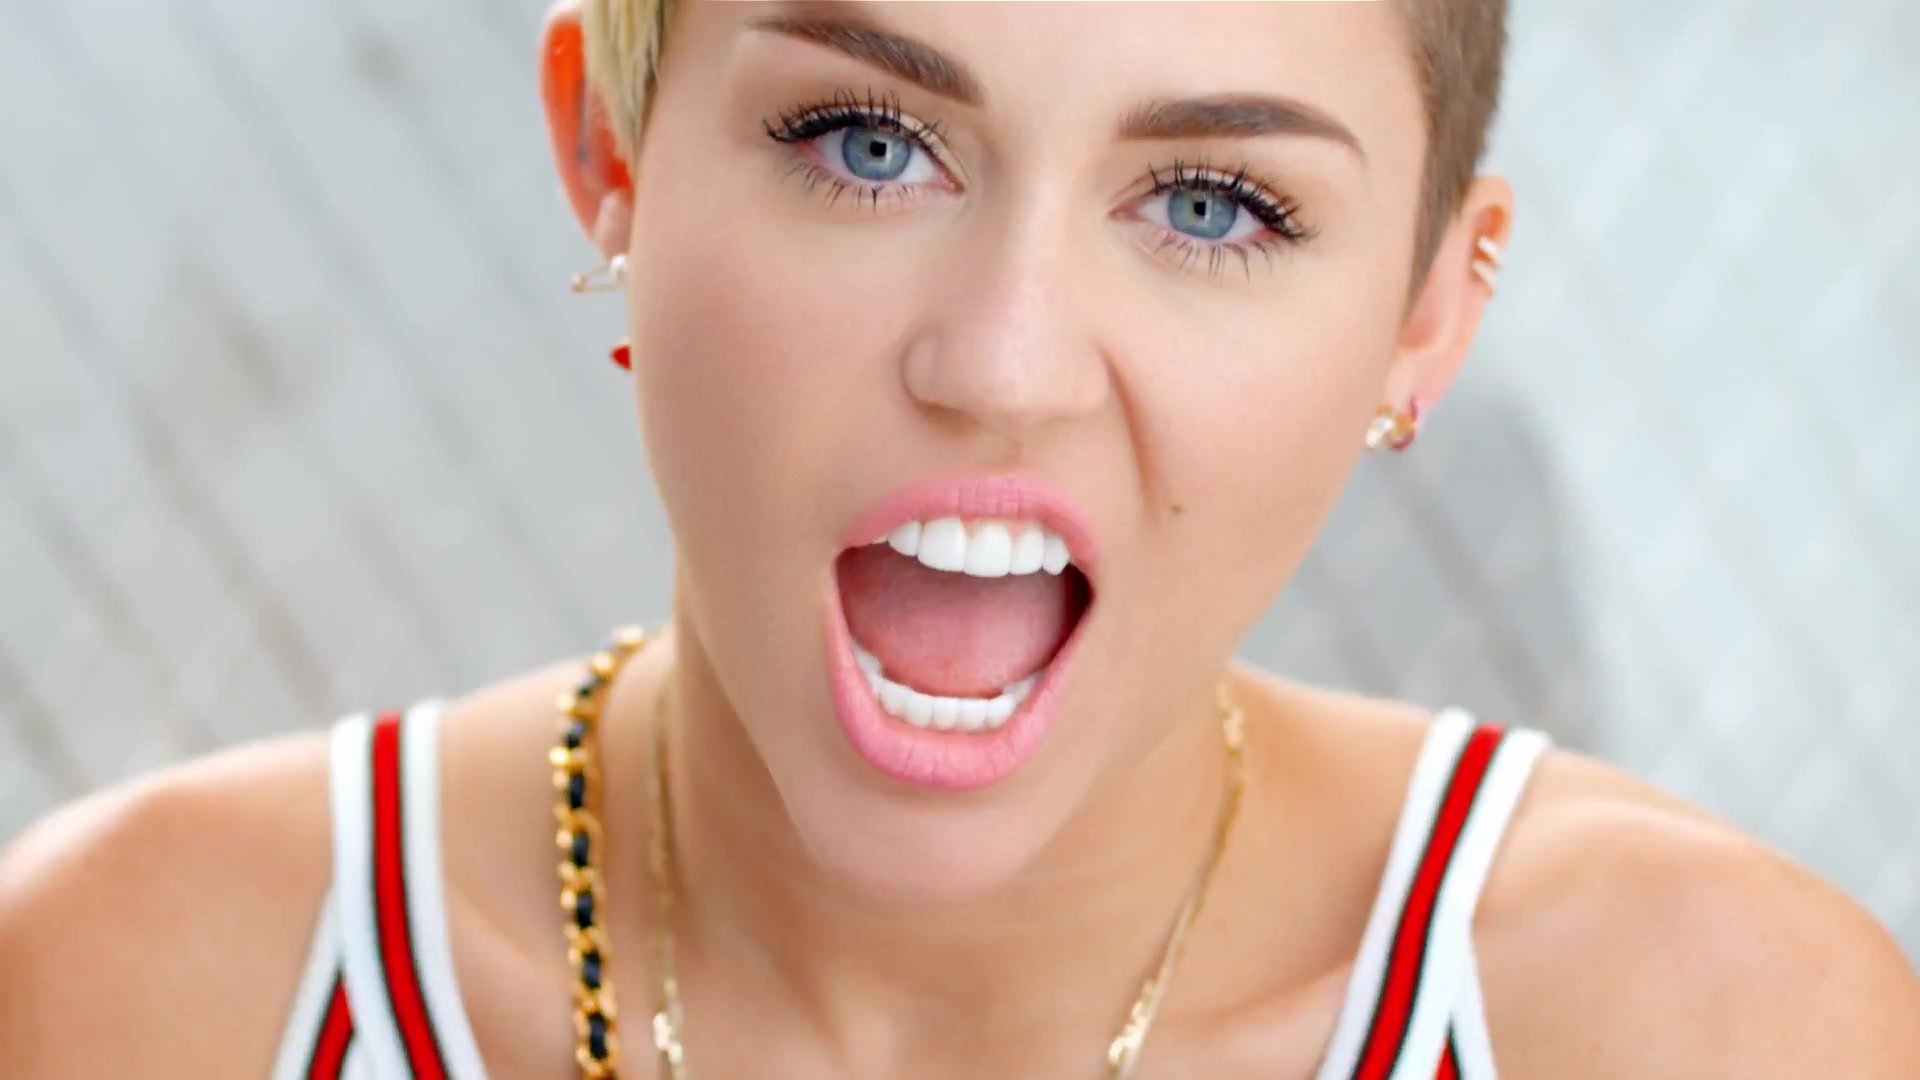 Sexualization Miley Cyrus - What Miley Cyrus Taught Me About Feminism